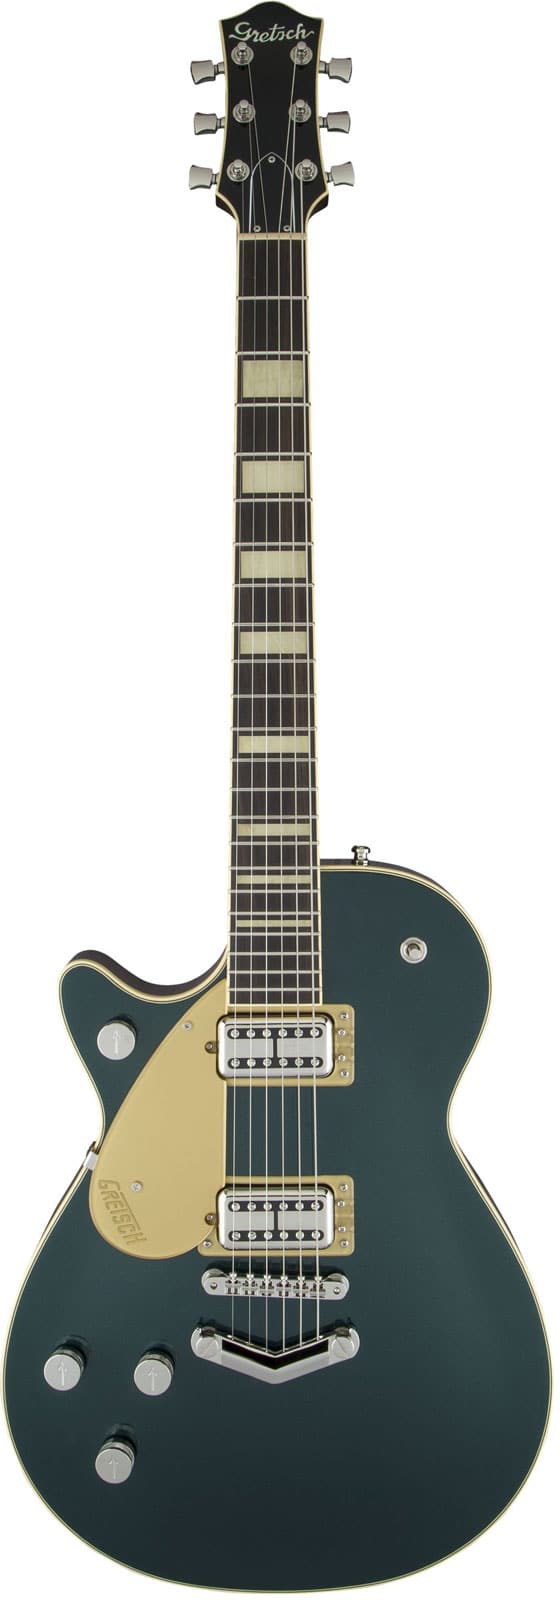 GRETSCH GUITARS G6228LH PLAYERS EDITION JET BT WITH V-STOPTAIL, LHED RW, CADILLAC GREEN